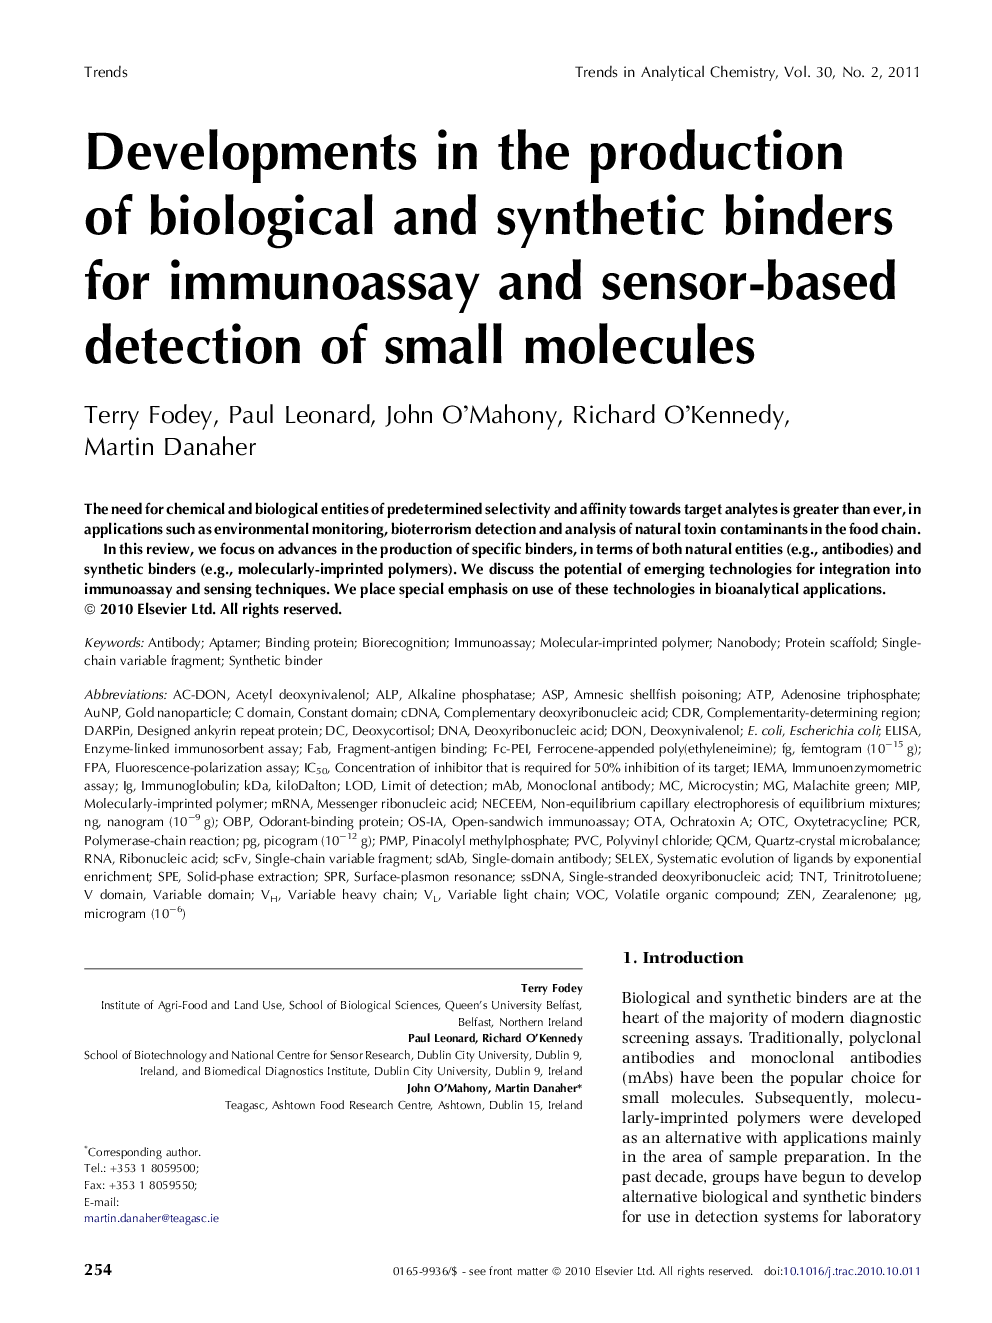 Developments in the production of biological and synthetic binders for immunoassay and sensor-based detection of small molecules